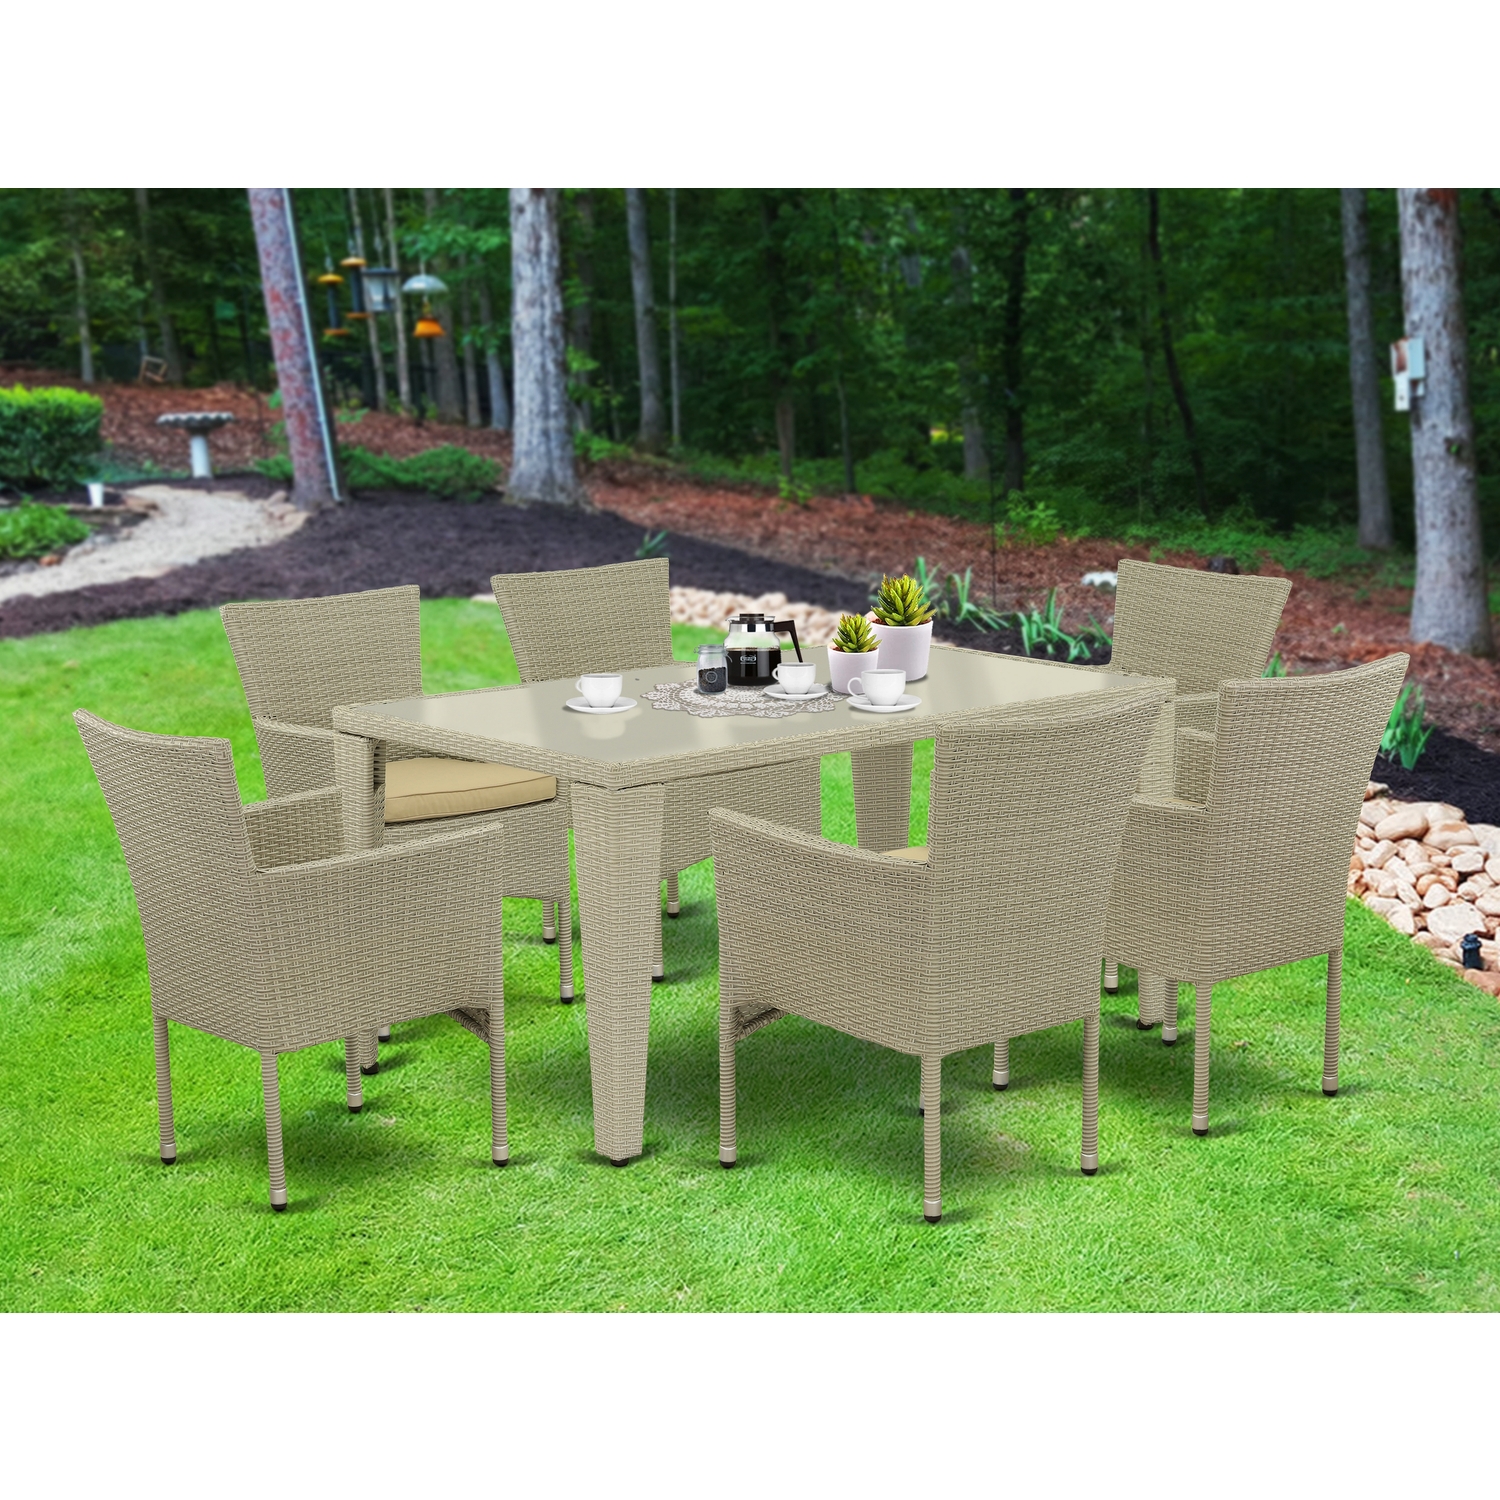 East West Furniture Gudhjem 7-piece Patio Dining Set with Armchairs in Natural - image 1 of 4